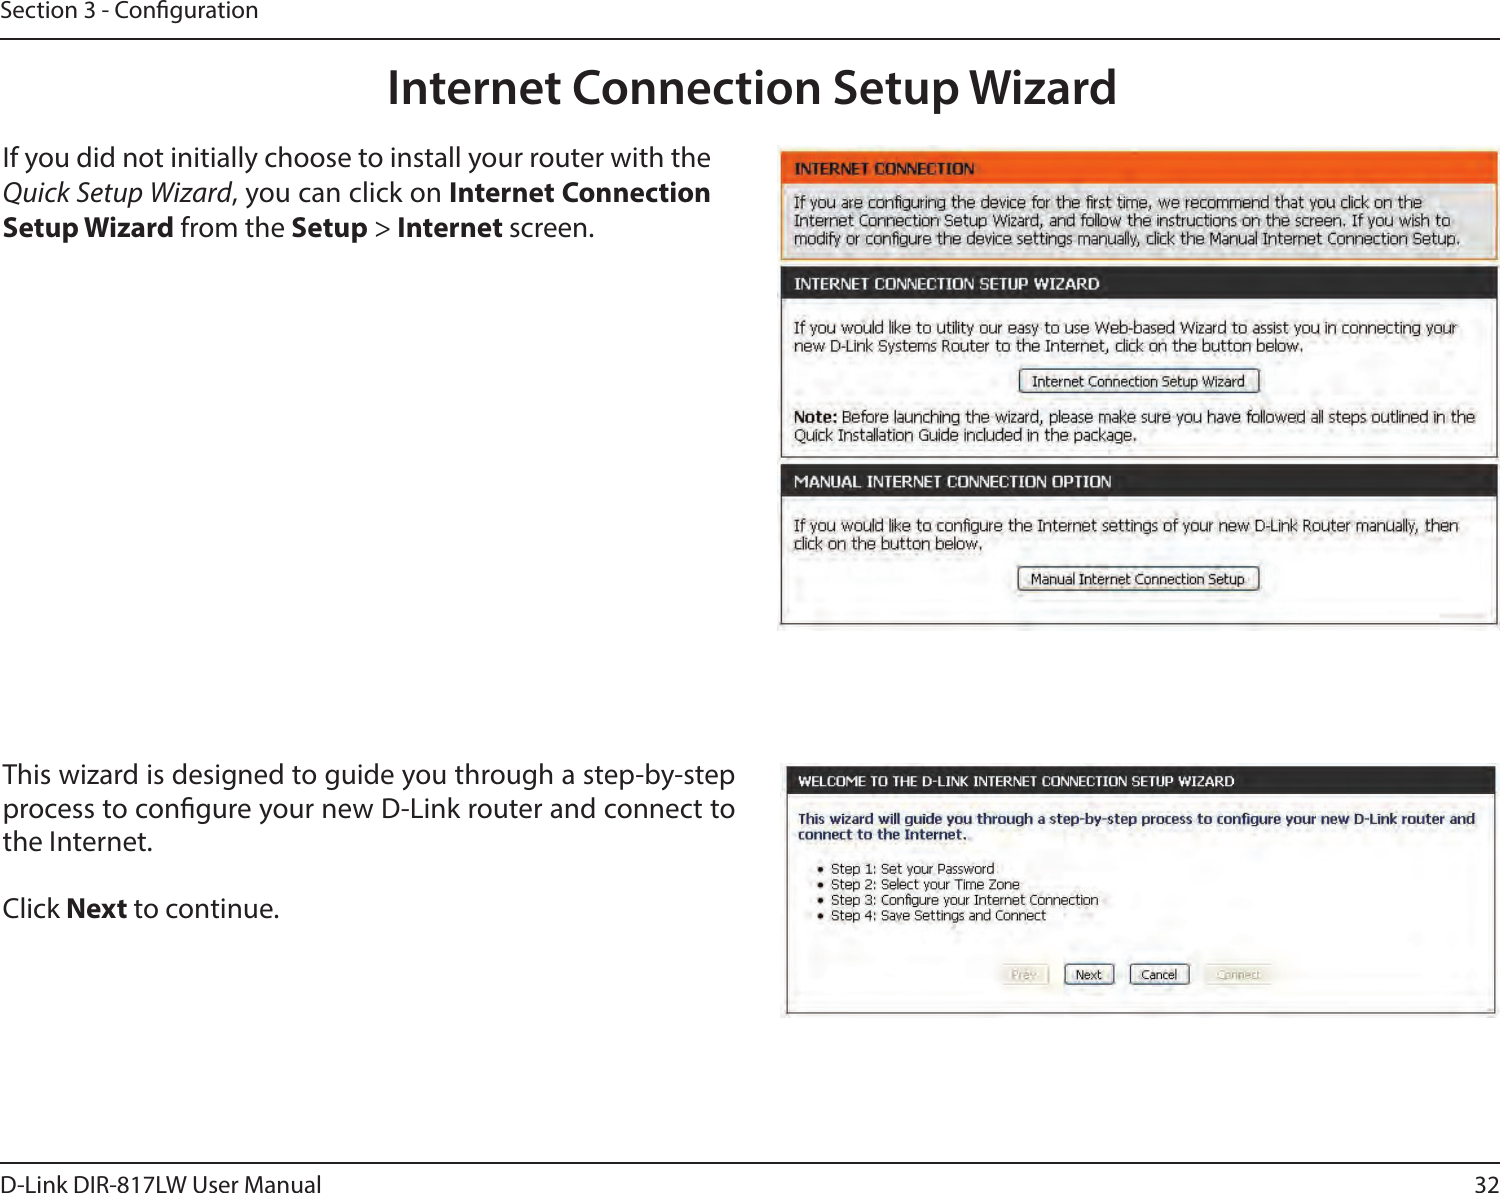 32D-Link DIR-817LW User ManualSection 3 - CongurationInternet Connection Setup WizardIf you did not initially choose to install your router with the Quick Setup Wizard, you can click on Internet Connection Setup Wizard from the Setup &gt; Internet screen.This wizard is designed to guide you through a step-by-step process to congure your new D-Link router and connect to the Internet.Click Next to continue. 